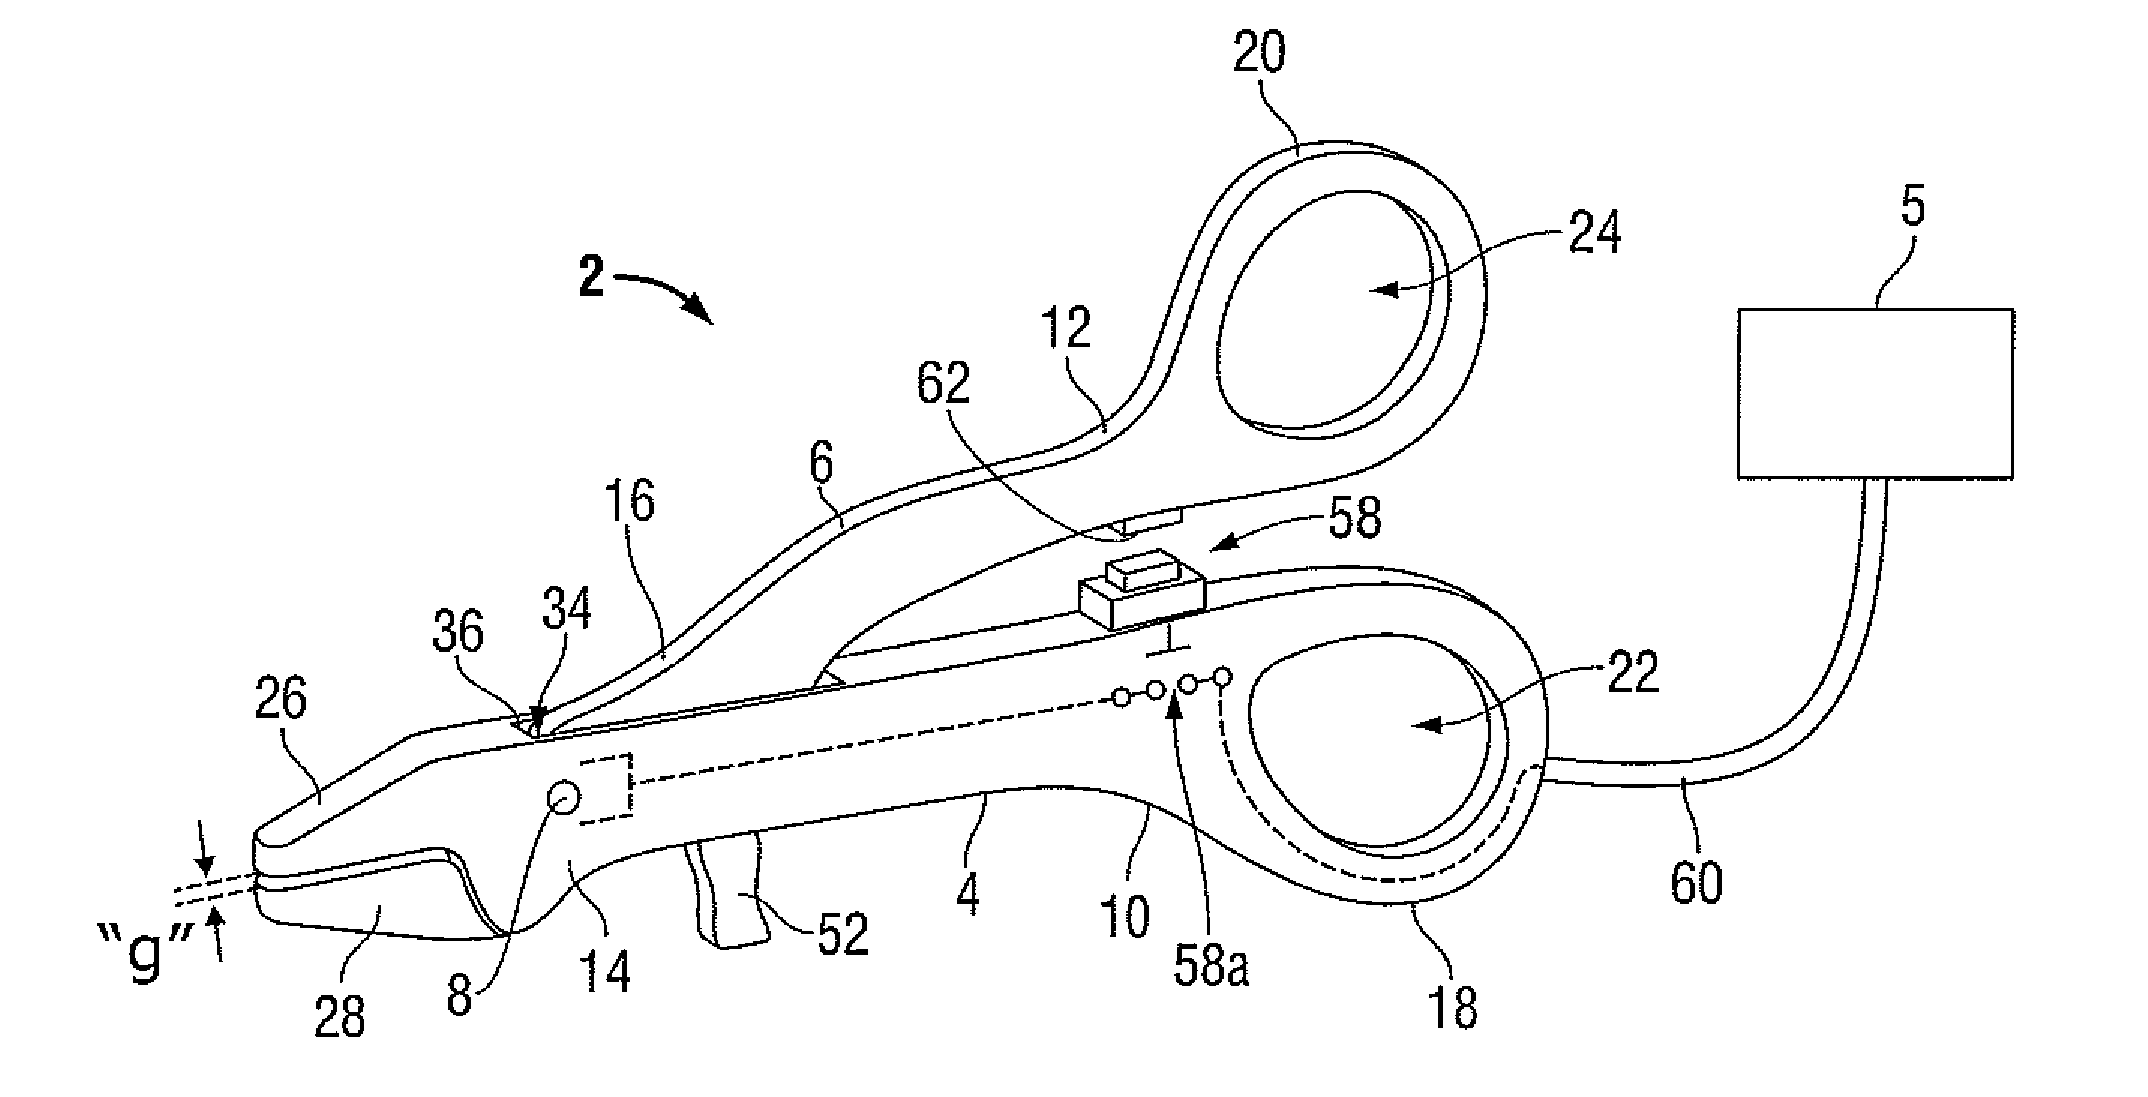 Open Vessel Sealing Instrument and Method of Manufacturing the Same